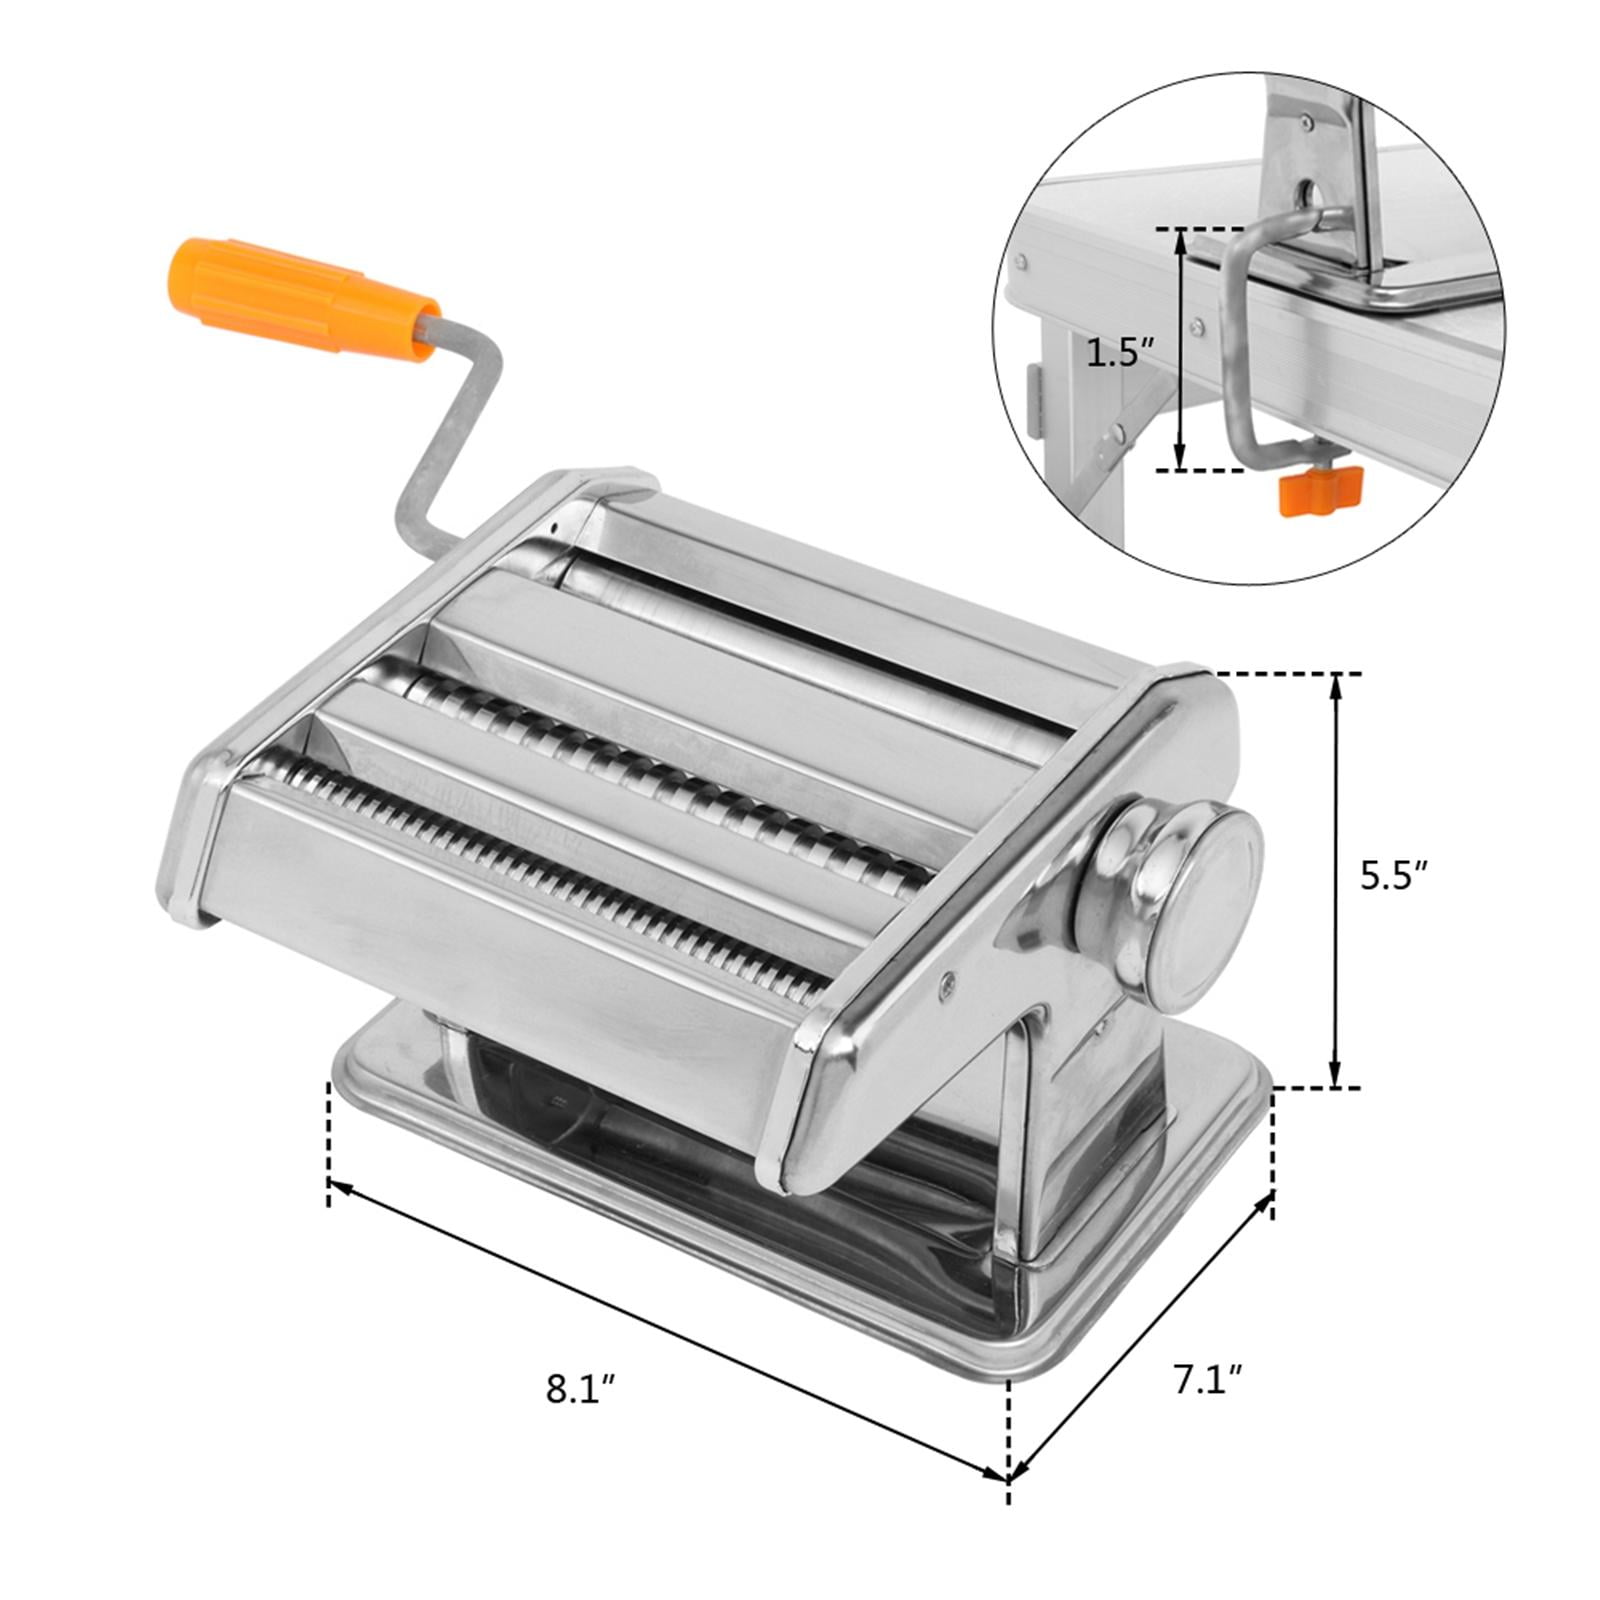 Dropship Pasta Maker Roller Machine Fettuccine Noodle Maker to Sell Online  at a Lower Price